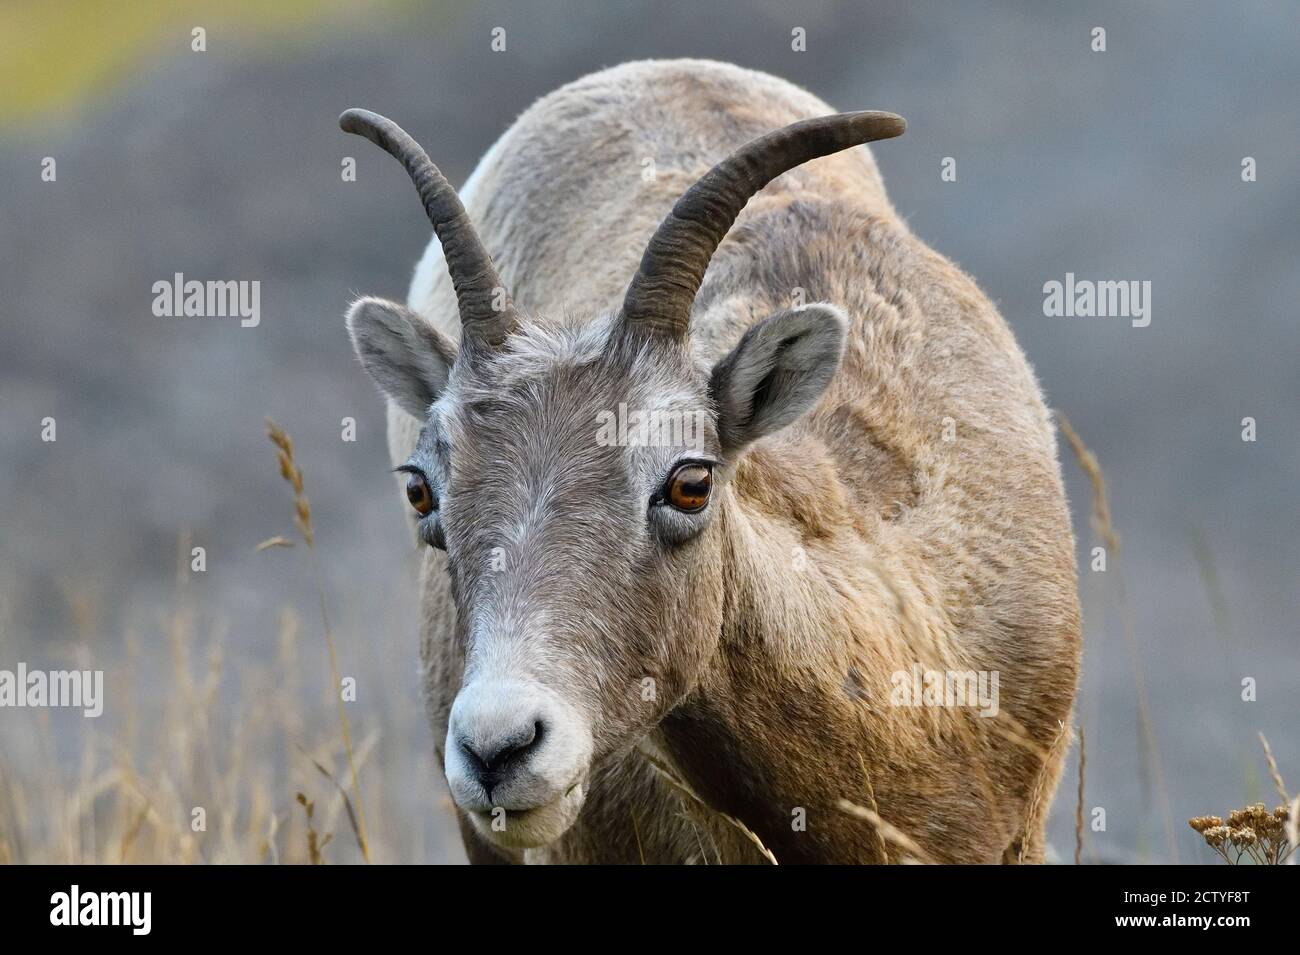 A close up image of a wild female Bighorn Sheep 'Ovis canadensis', foraging on some wild grasses in rural Alberta Canada. Stock Photo